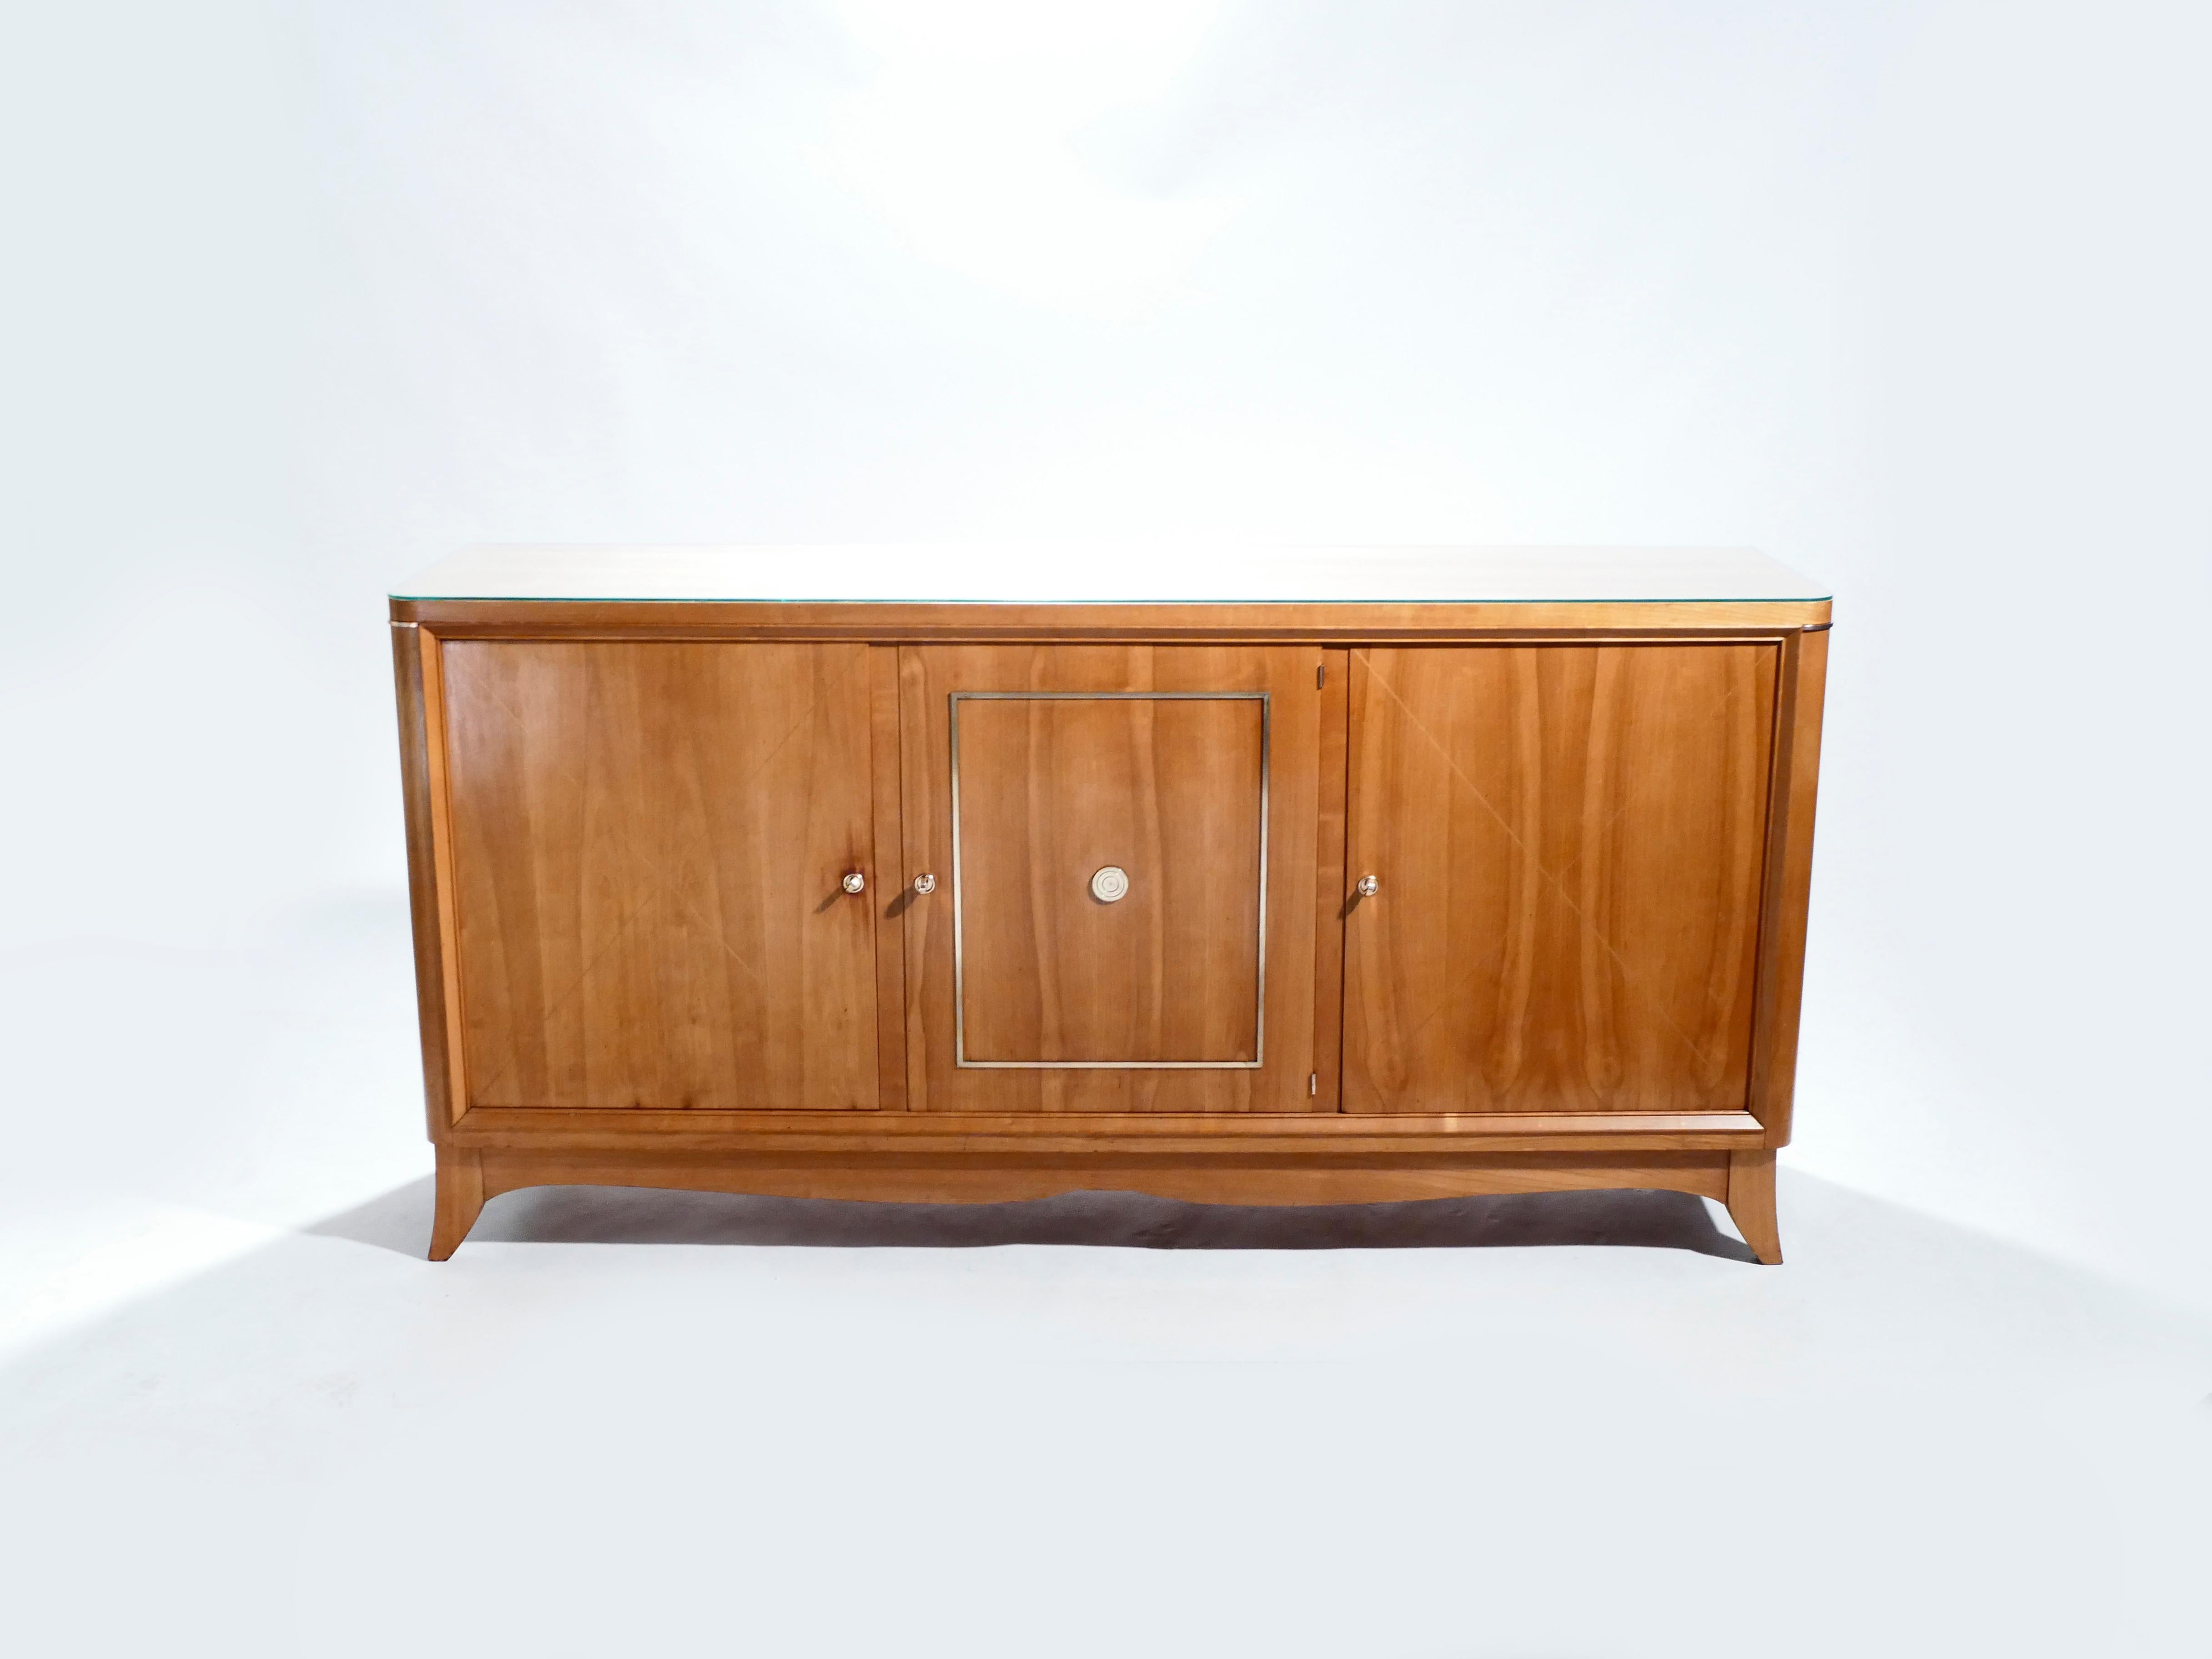 This attractive sideboard features a smooth cherrywood build and bright brass accents. The sideboard is reminiscent of French designer Jean Pascaud or Suzanne Guiguichon acclaimed work. The eye-catching brass decorative knobs on the centre cabinets